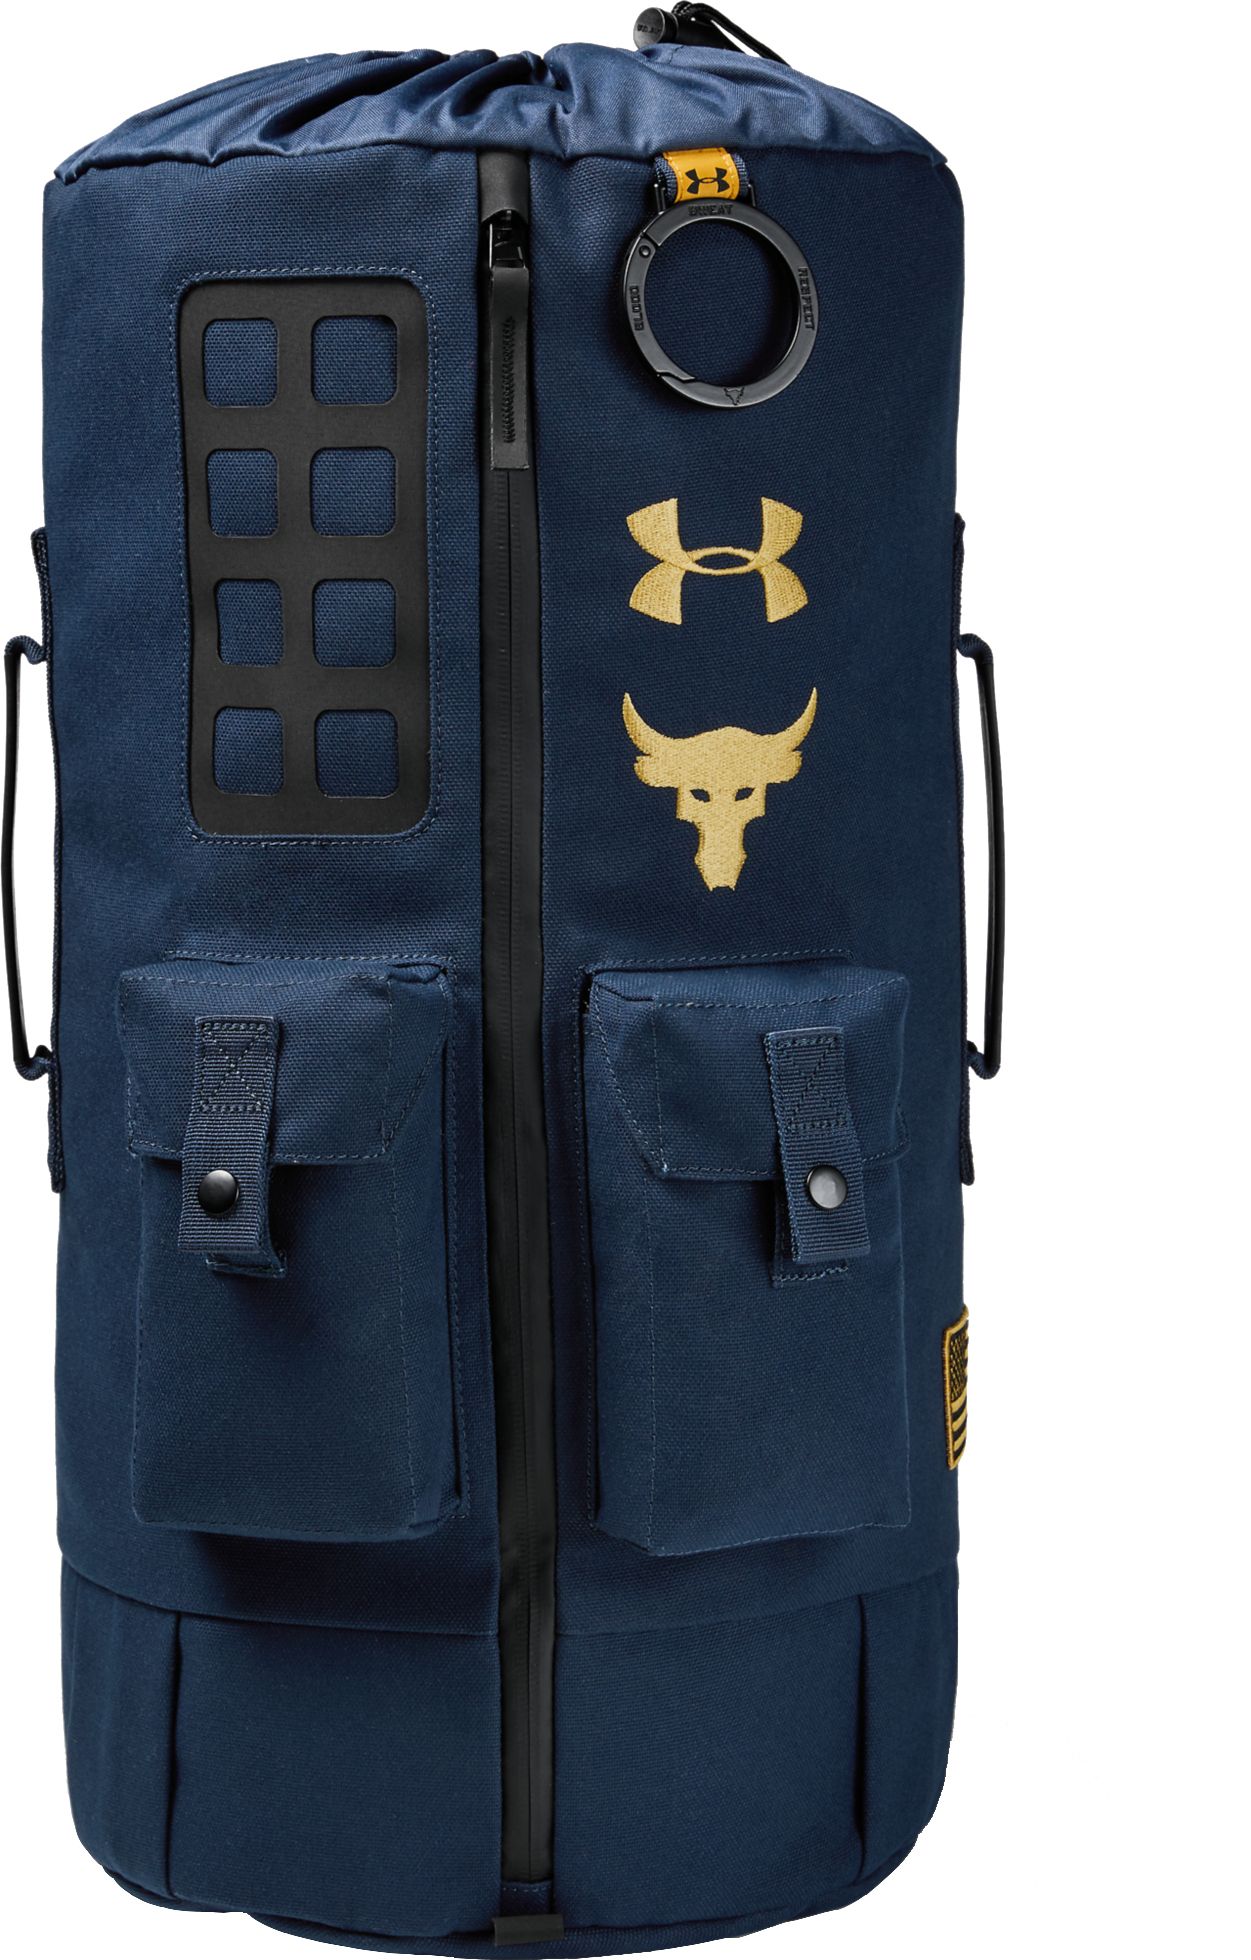 under armour project rock duffle bag